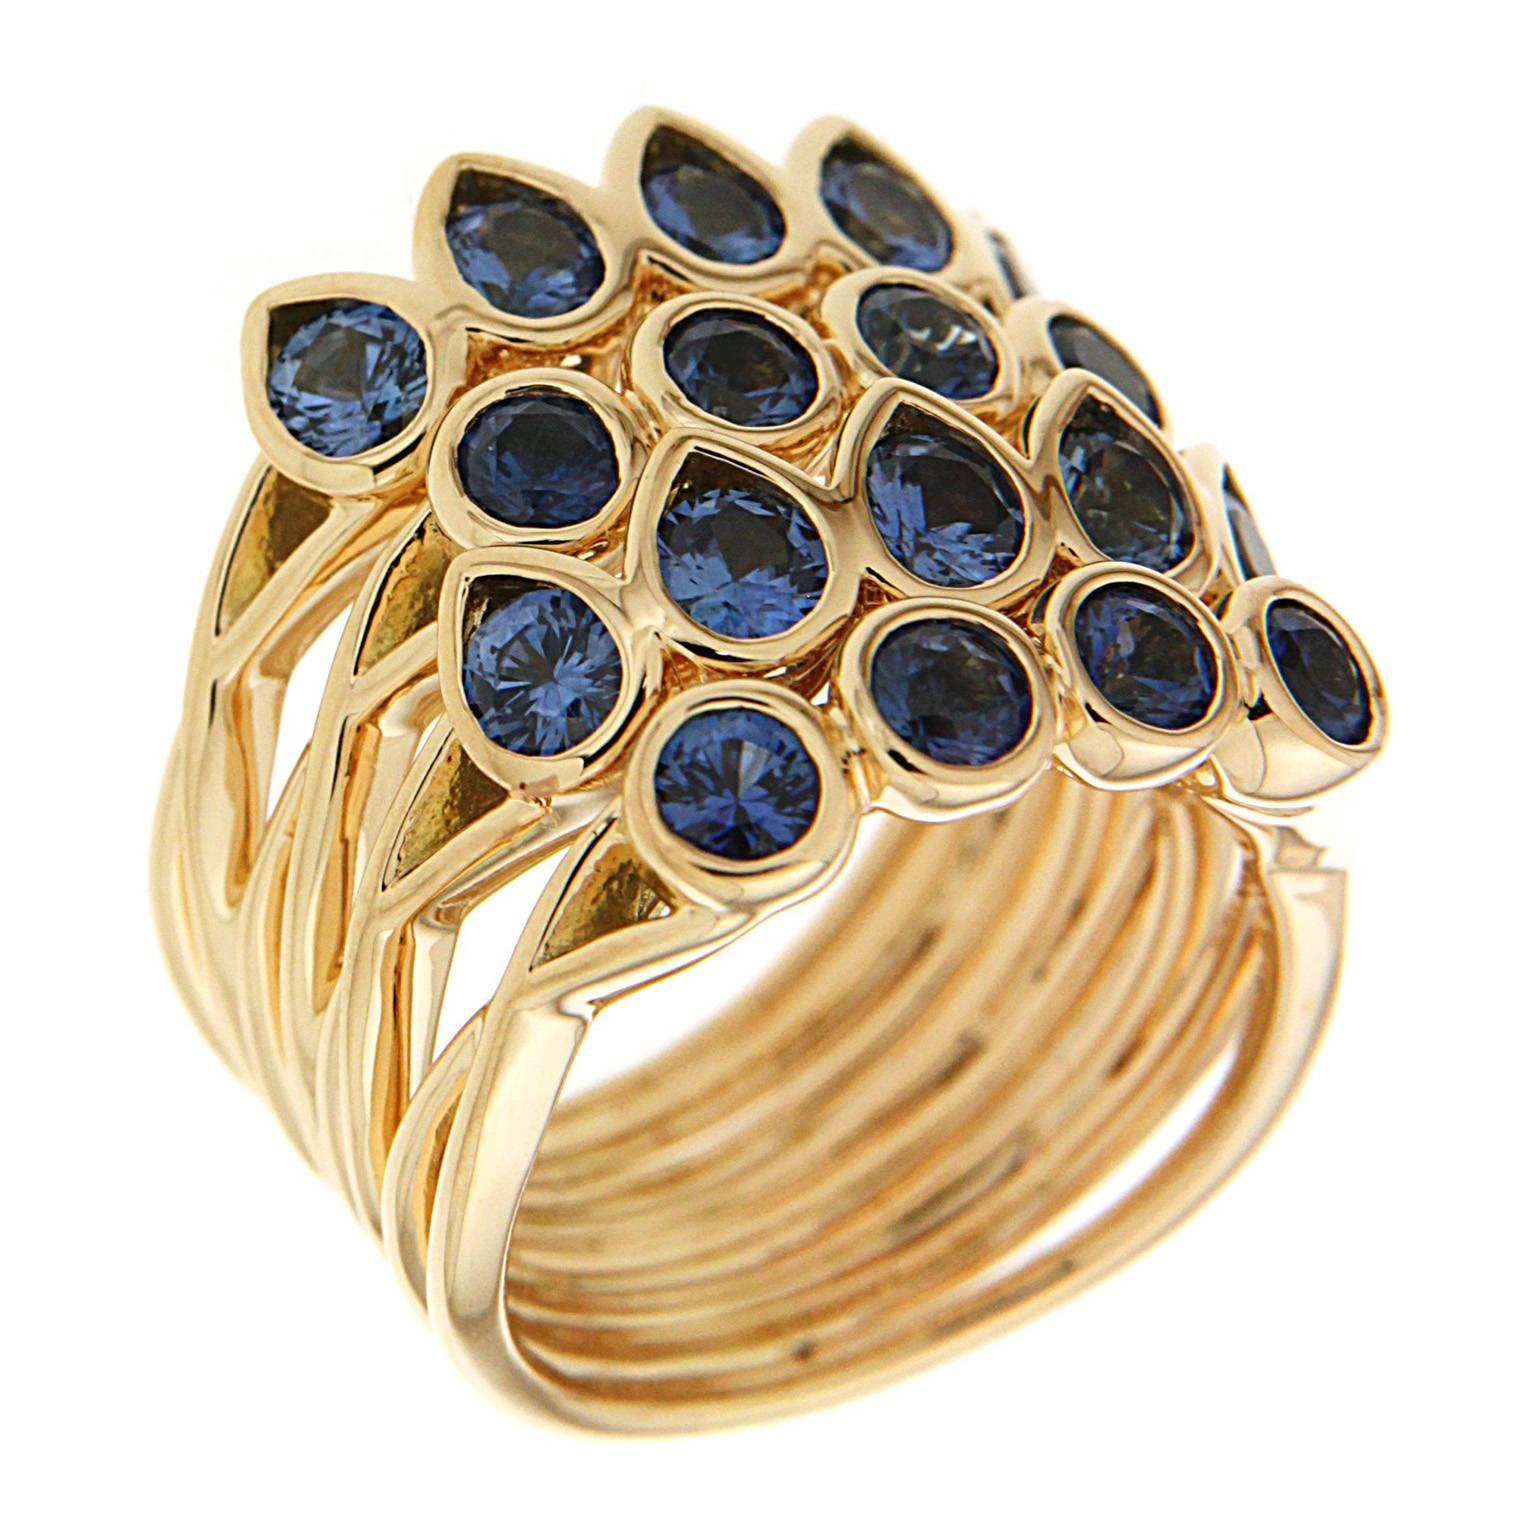 This unique ring features four Pear Shape and Round Sapphire stacking bands with slight flexibility. The ring is finished in 18kt yellow gold. 

Current finger size 6.5 - can be adjusted to fit your finger size.